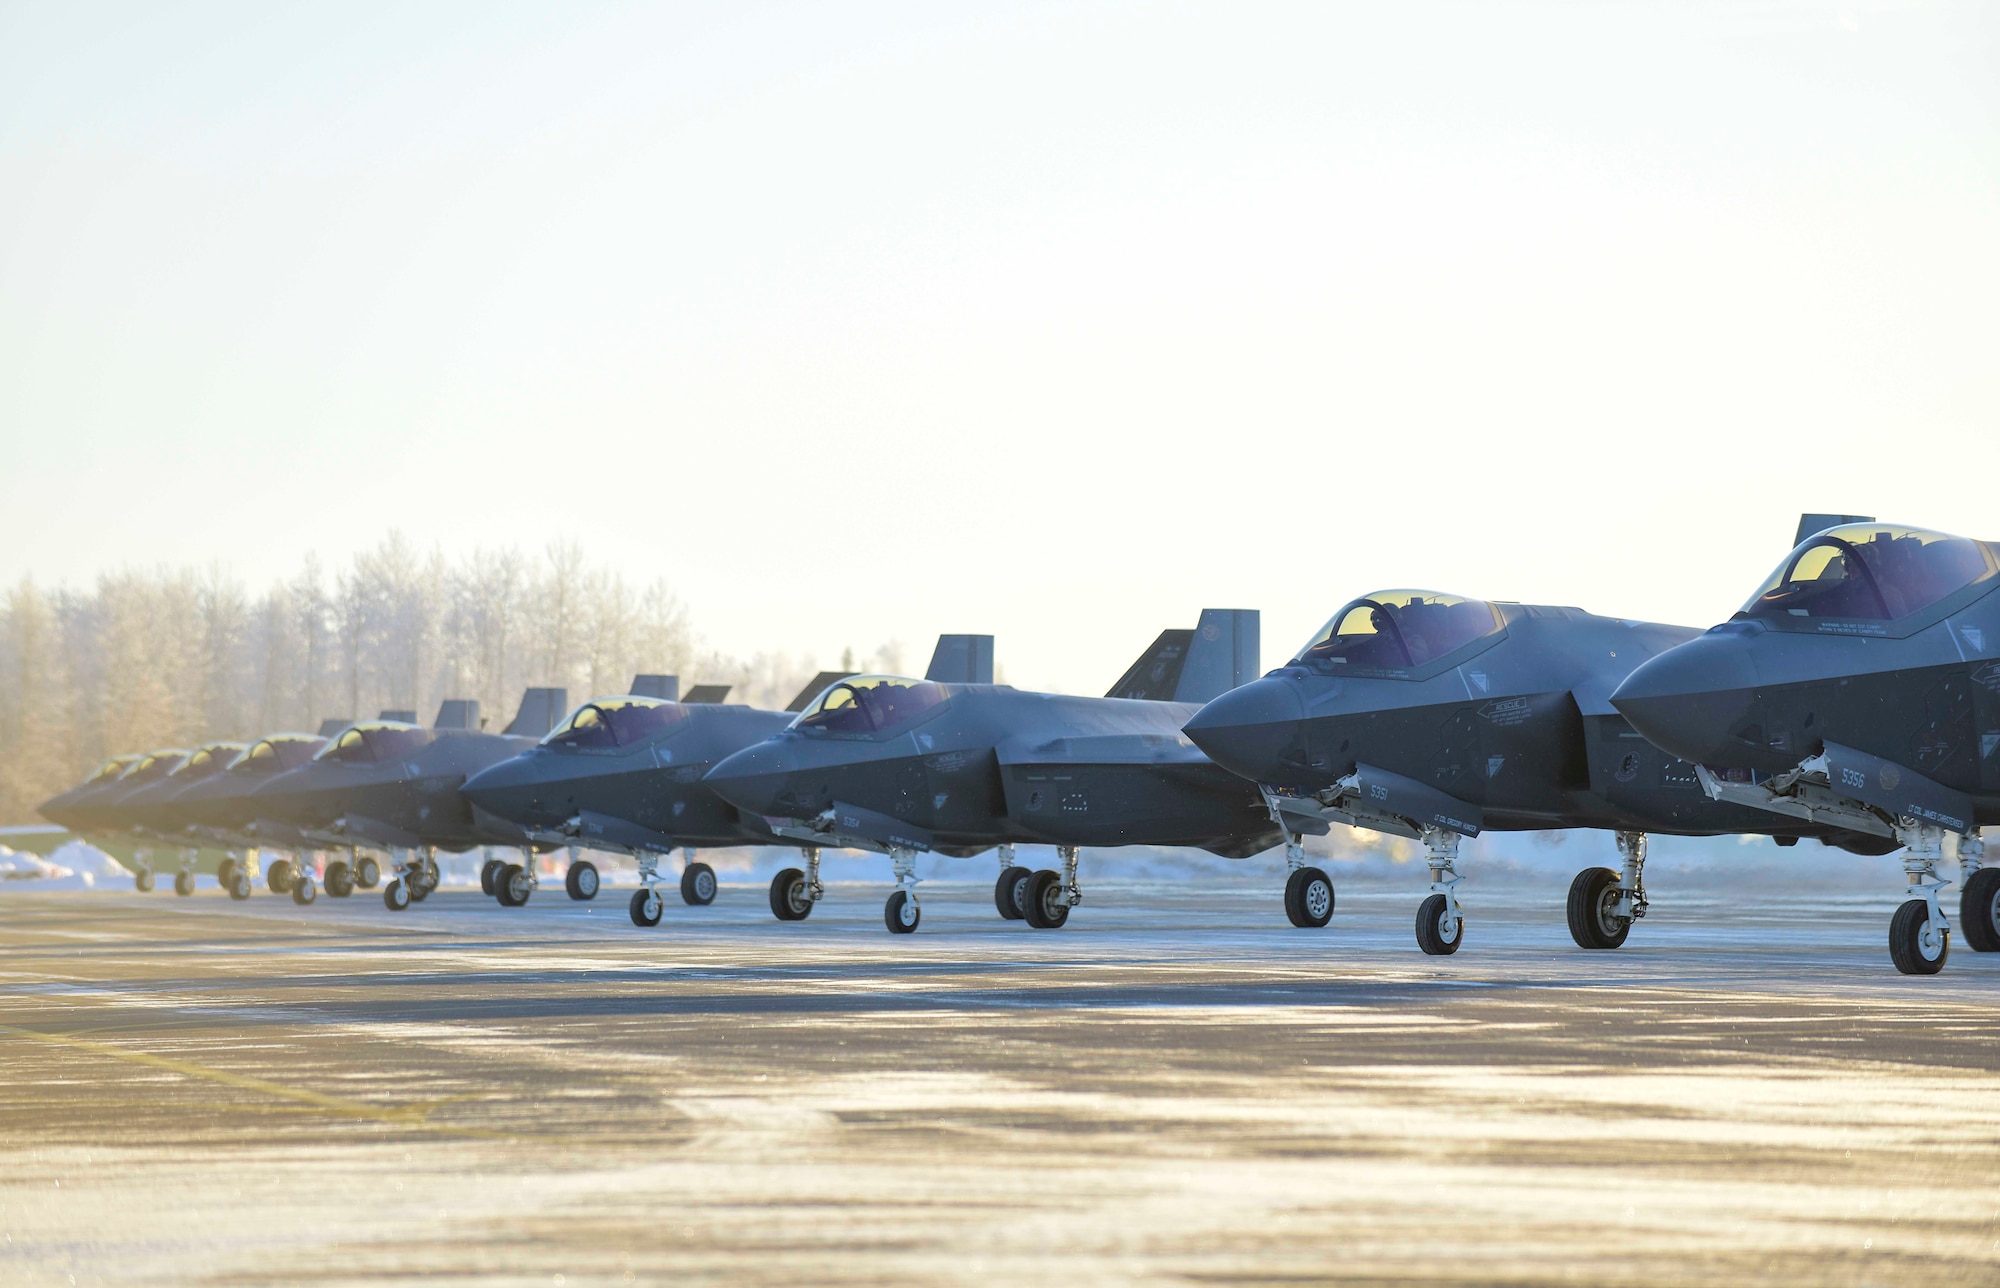 F-35A Lightning IIs assigned to the 354th Fighter Wing form up prior to take off at Eielson Air Force Base, Alaska, Nov. 17, 2020. Alaska is one of the most strategic locations in the world and will be home to the highest concentration of fifth generation aircraft in the Department of Defense. (U.S. Air Force photo by Senior Airman Keith Holcomb)